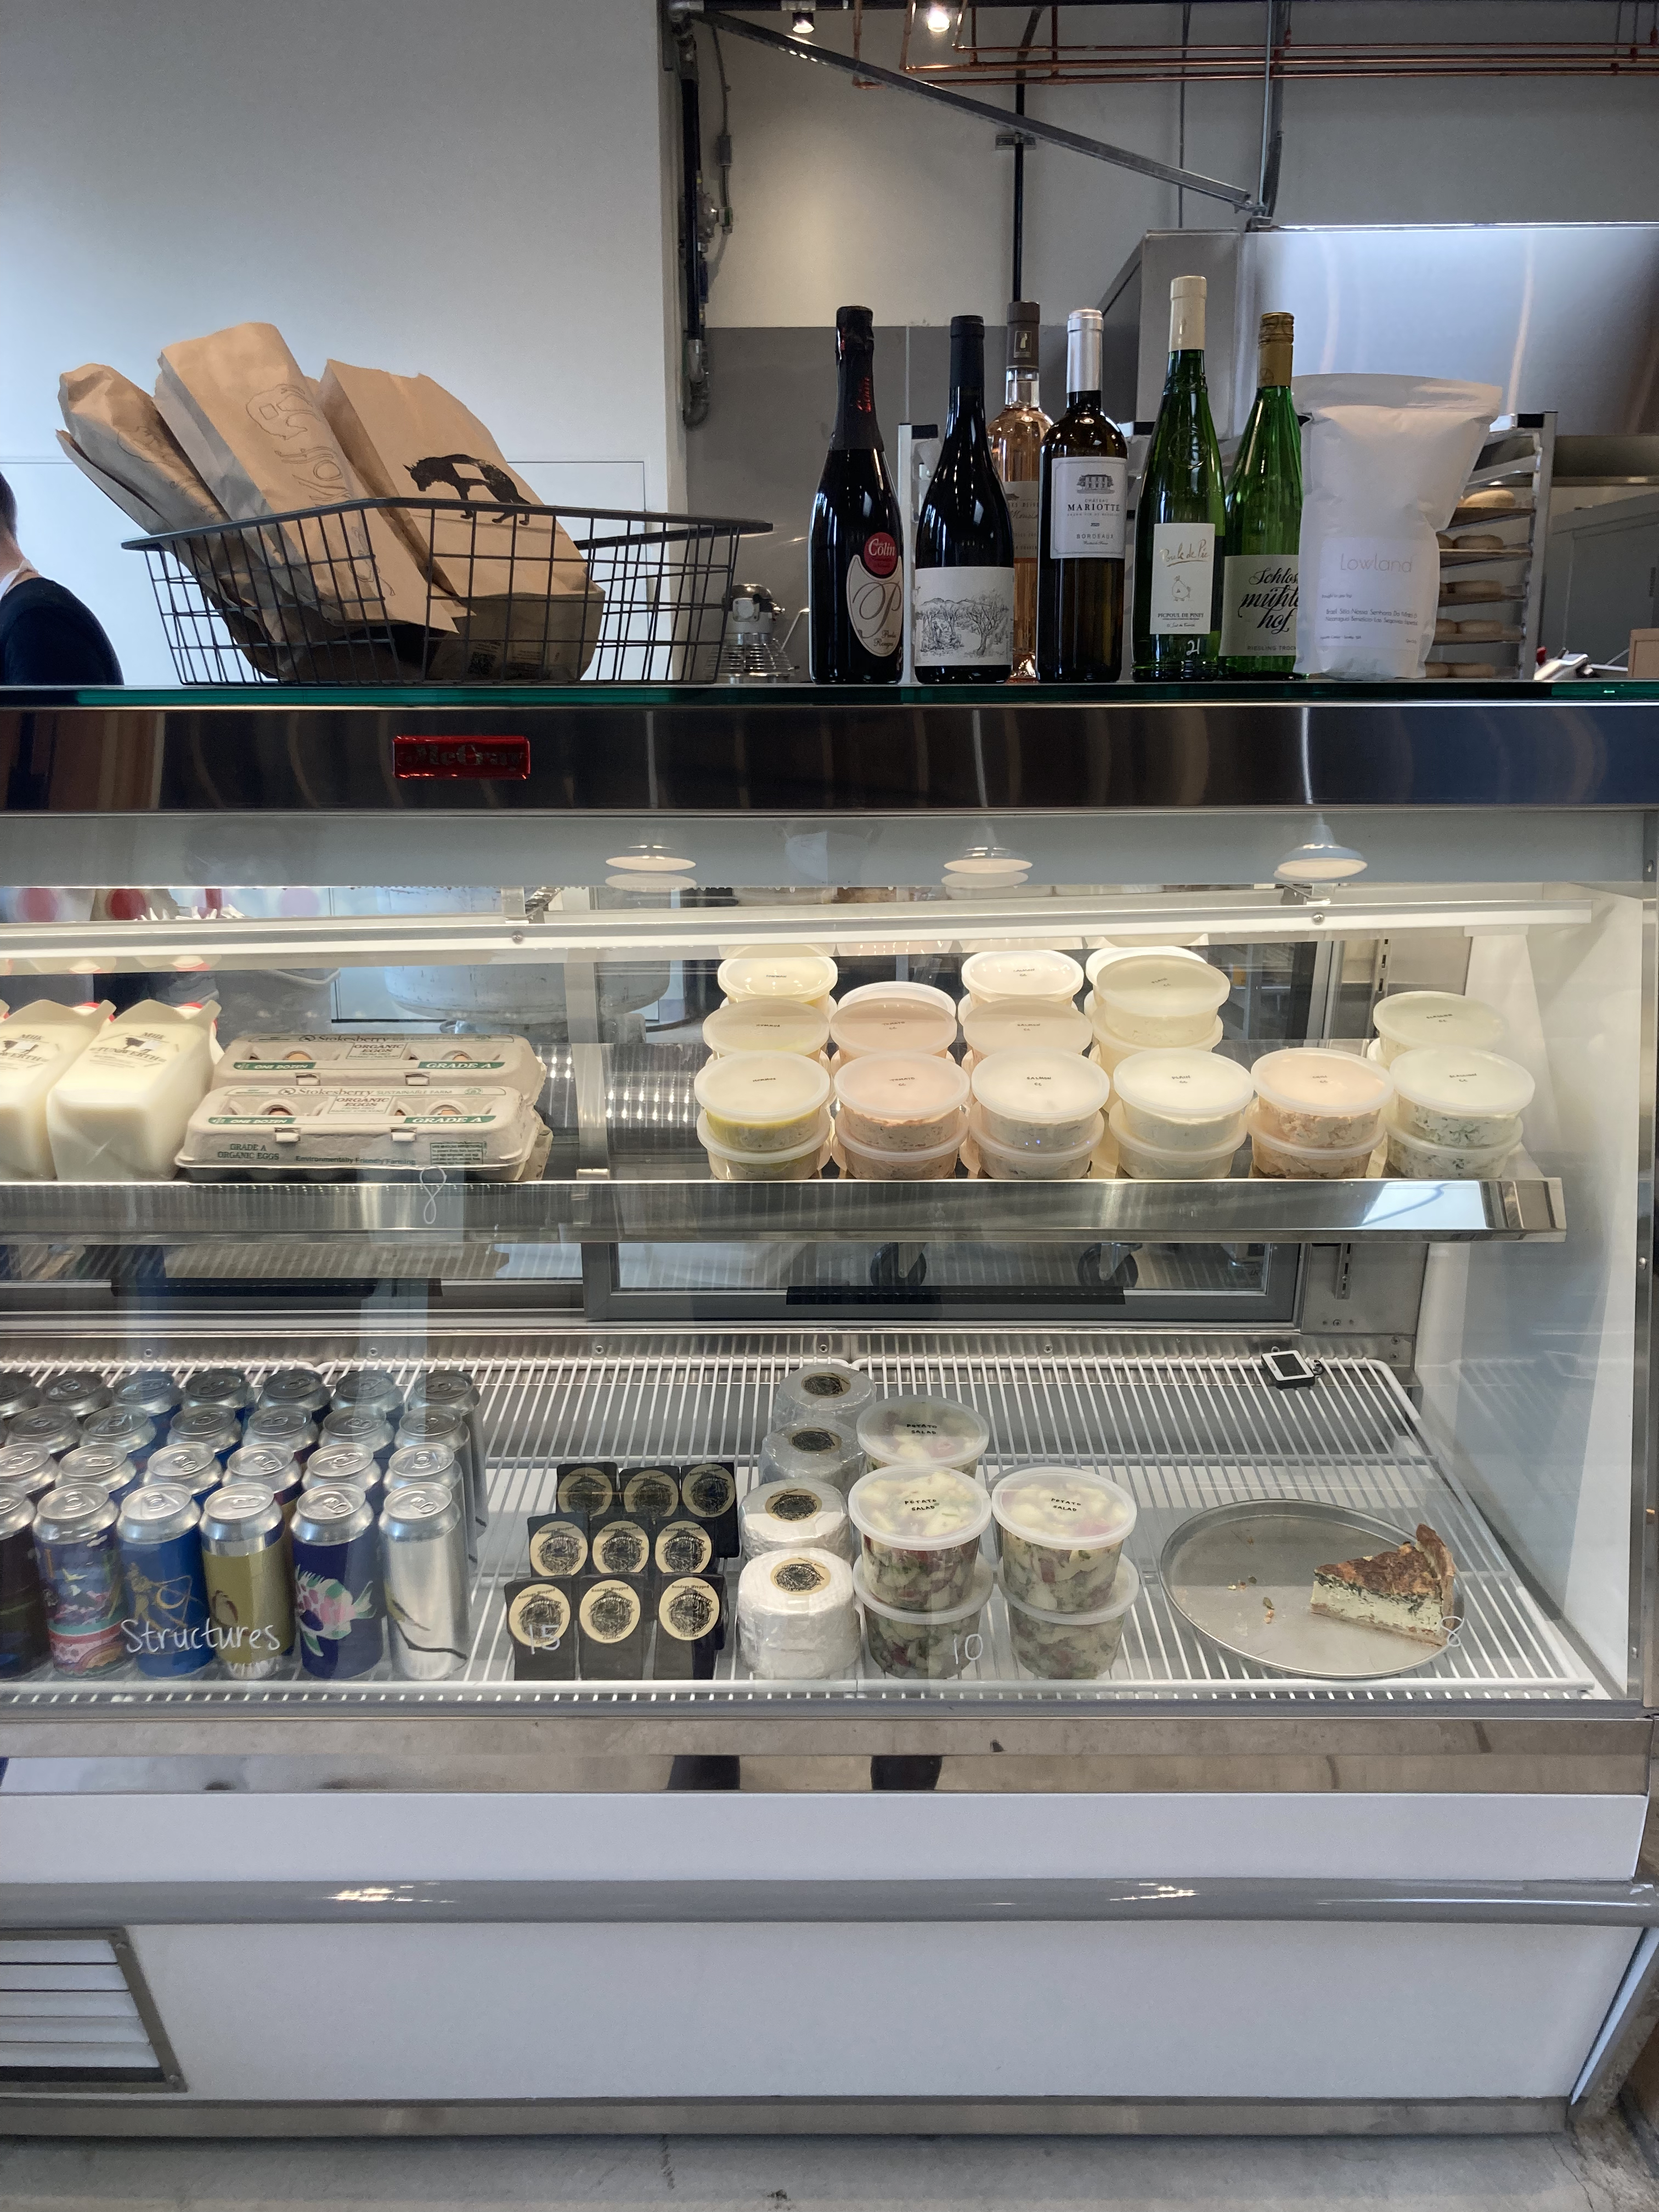 A deli case filled with cream cheese spreads in plastic containers, cans of beer, milk, cartons of eggs, cheese, and more.